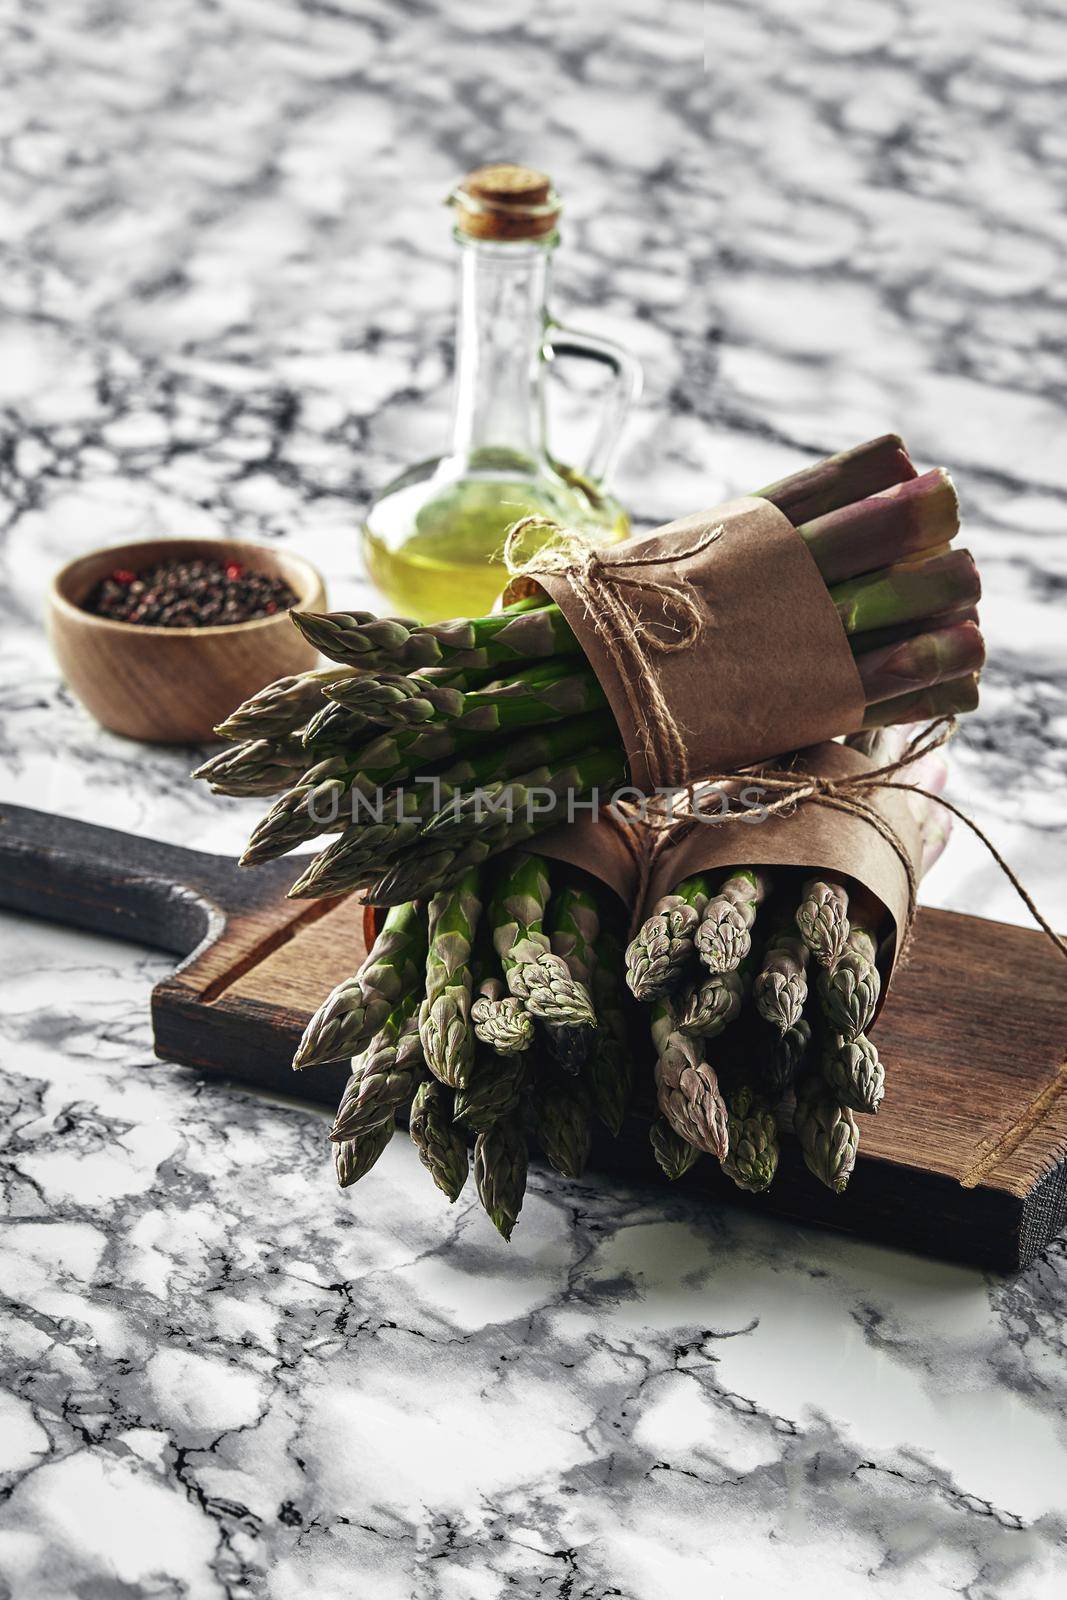 Bunch of an edible, green stalks of asparagus on a wooden board, marble background. Fresh vegetables with olive oil and seasonings, top view. Healthy meal. Spring harvest, agricultural farming concept.